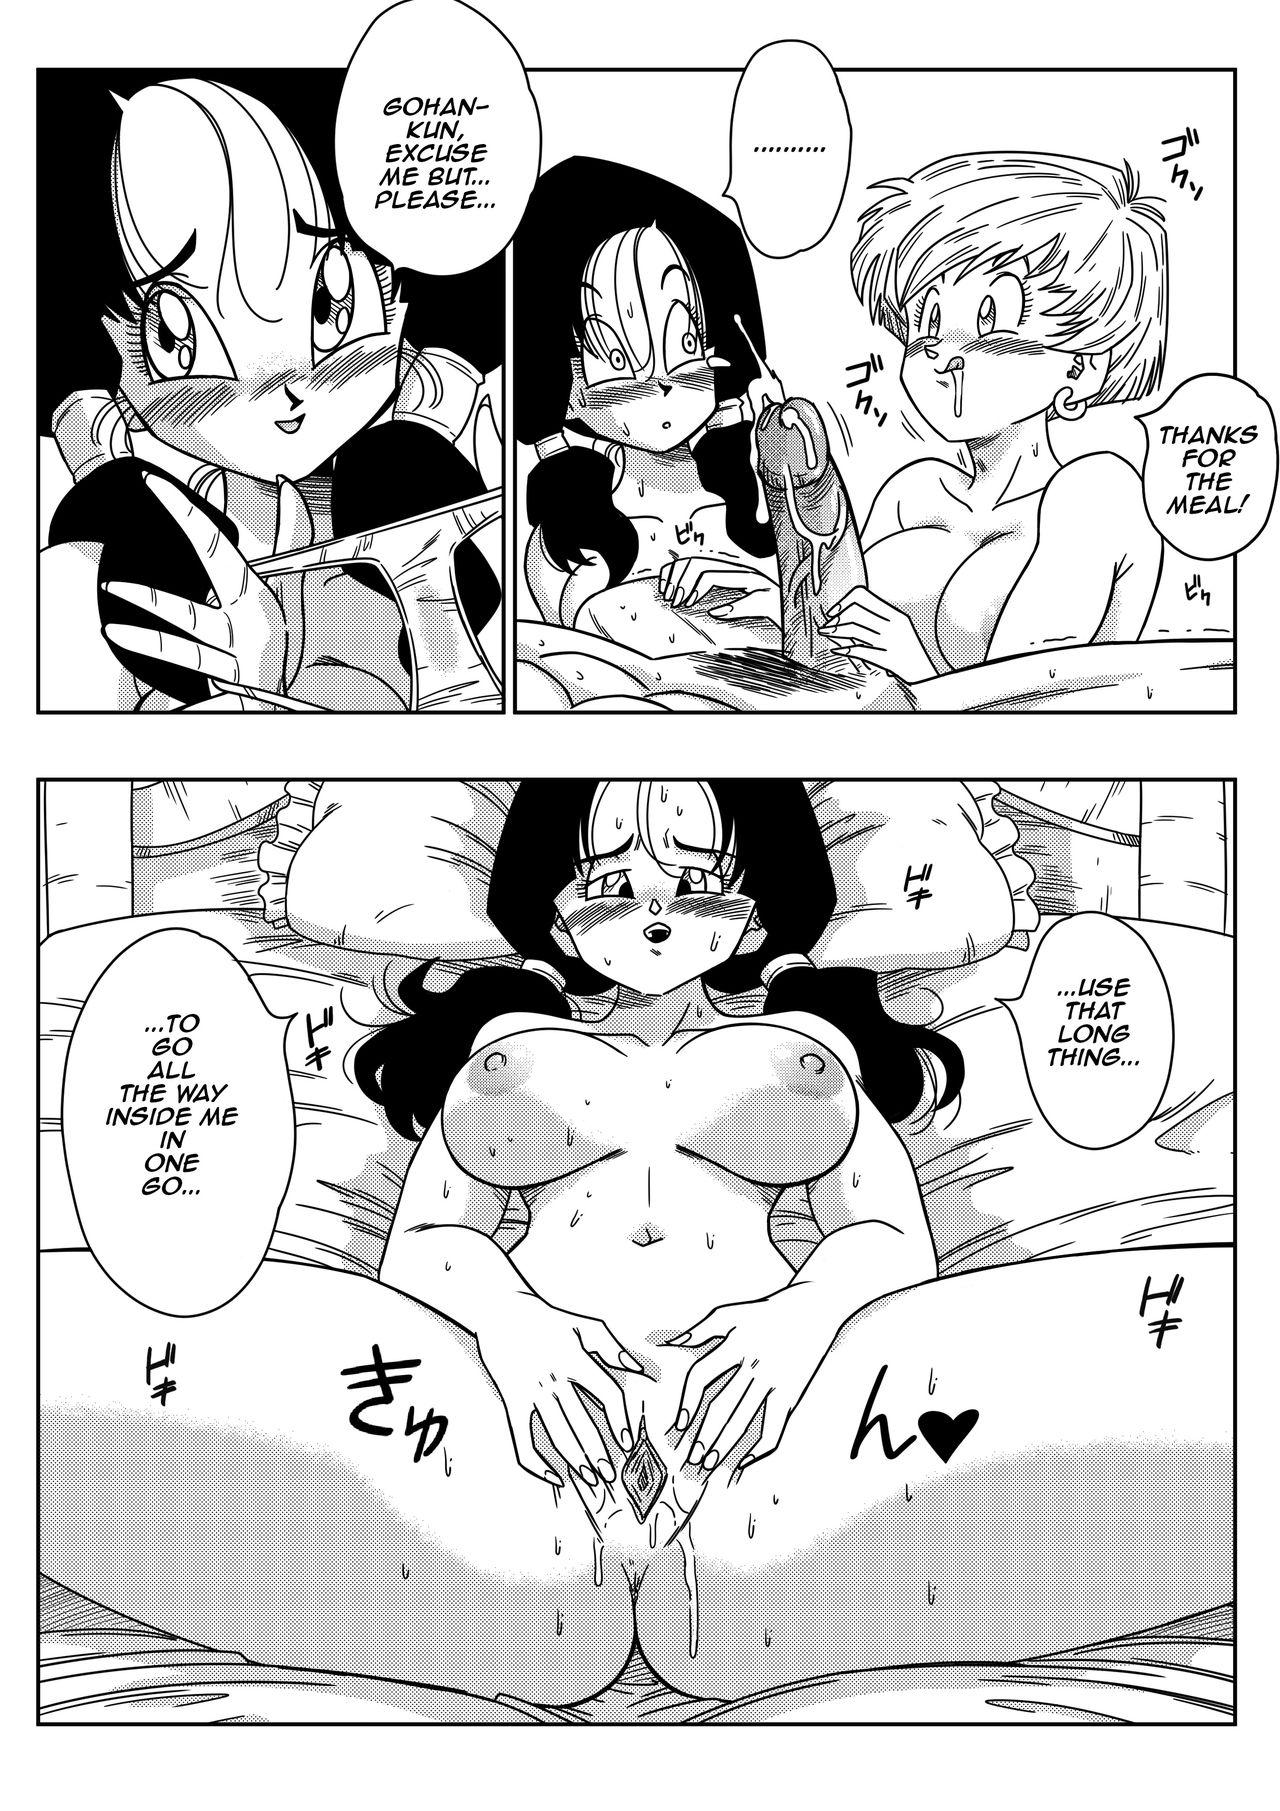 Animation [Yamamoto] LOVE TRIANGLE Z PART 2 - Takusan Ecchi Shichaou! | LOVE TRIANGLE Z PART 2 - Let's Have Lots of Sex! (Dragon Ball Z) [English] [Decensored] - Dragon ball z All - Page 12